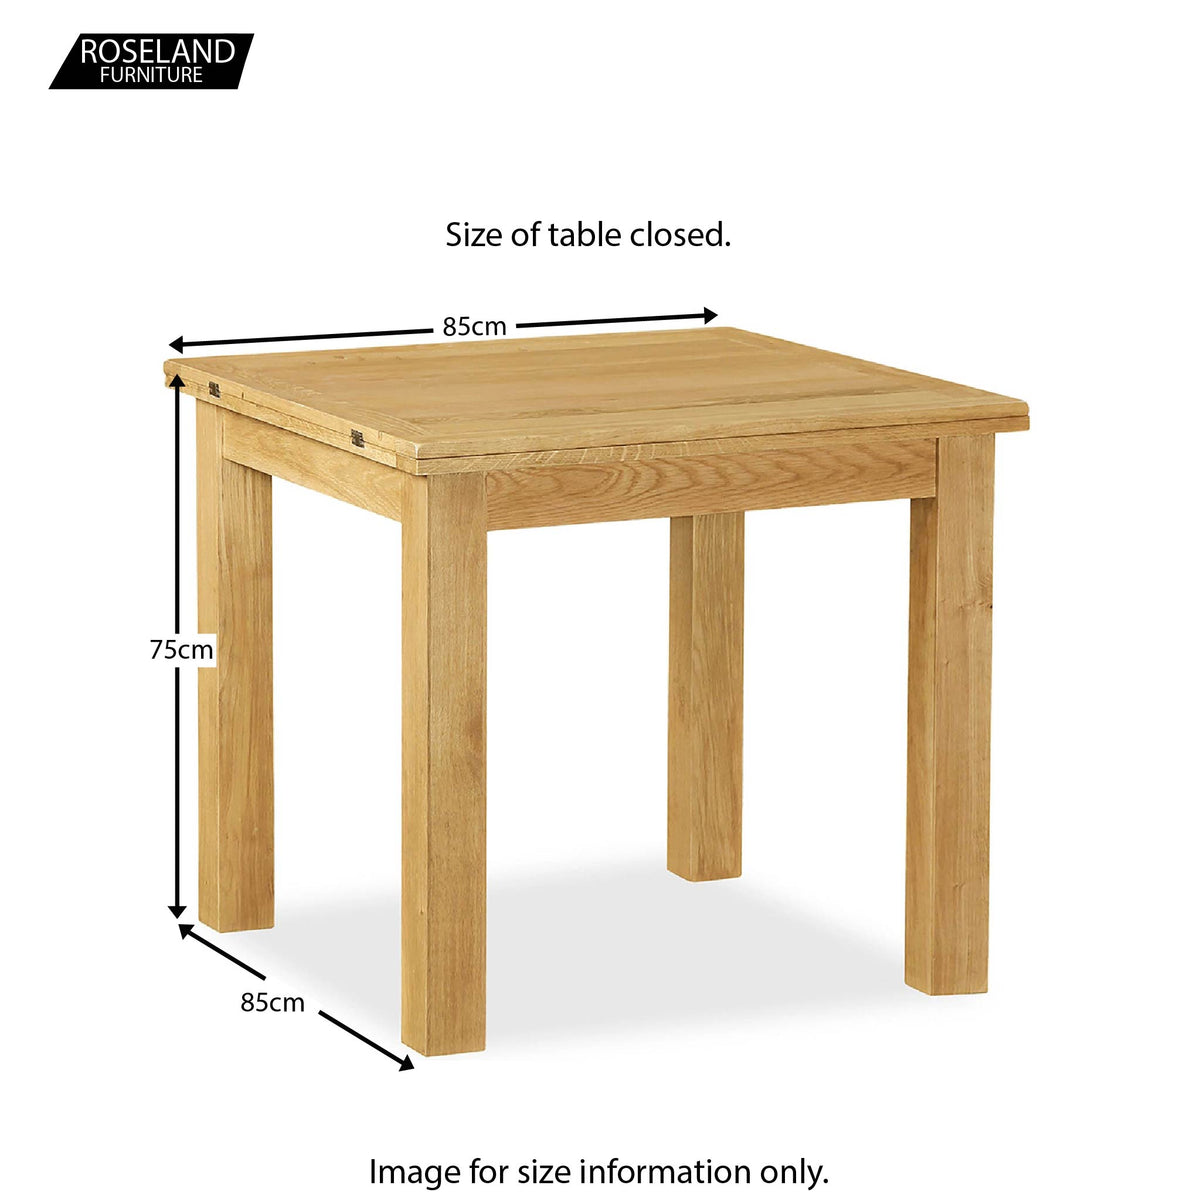 Lanner Oak Square Extending Table - Size Guide of table closed